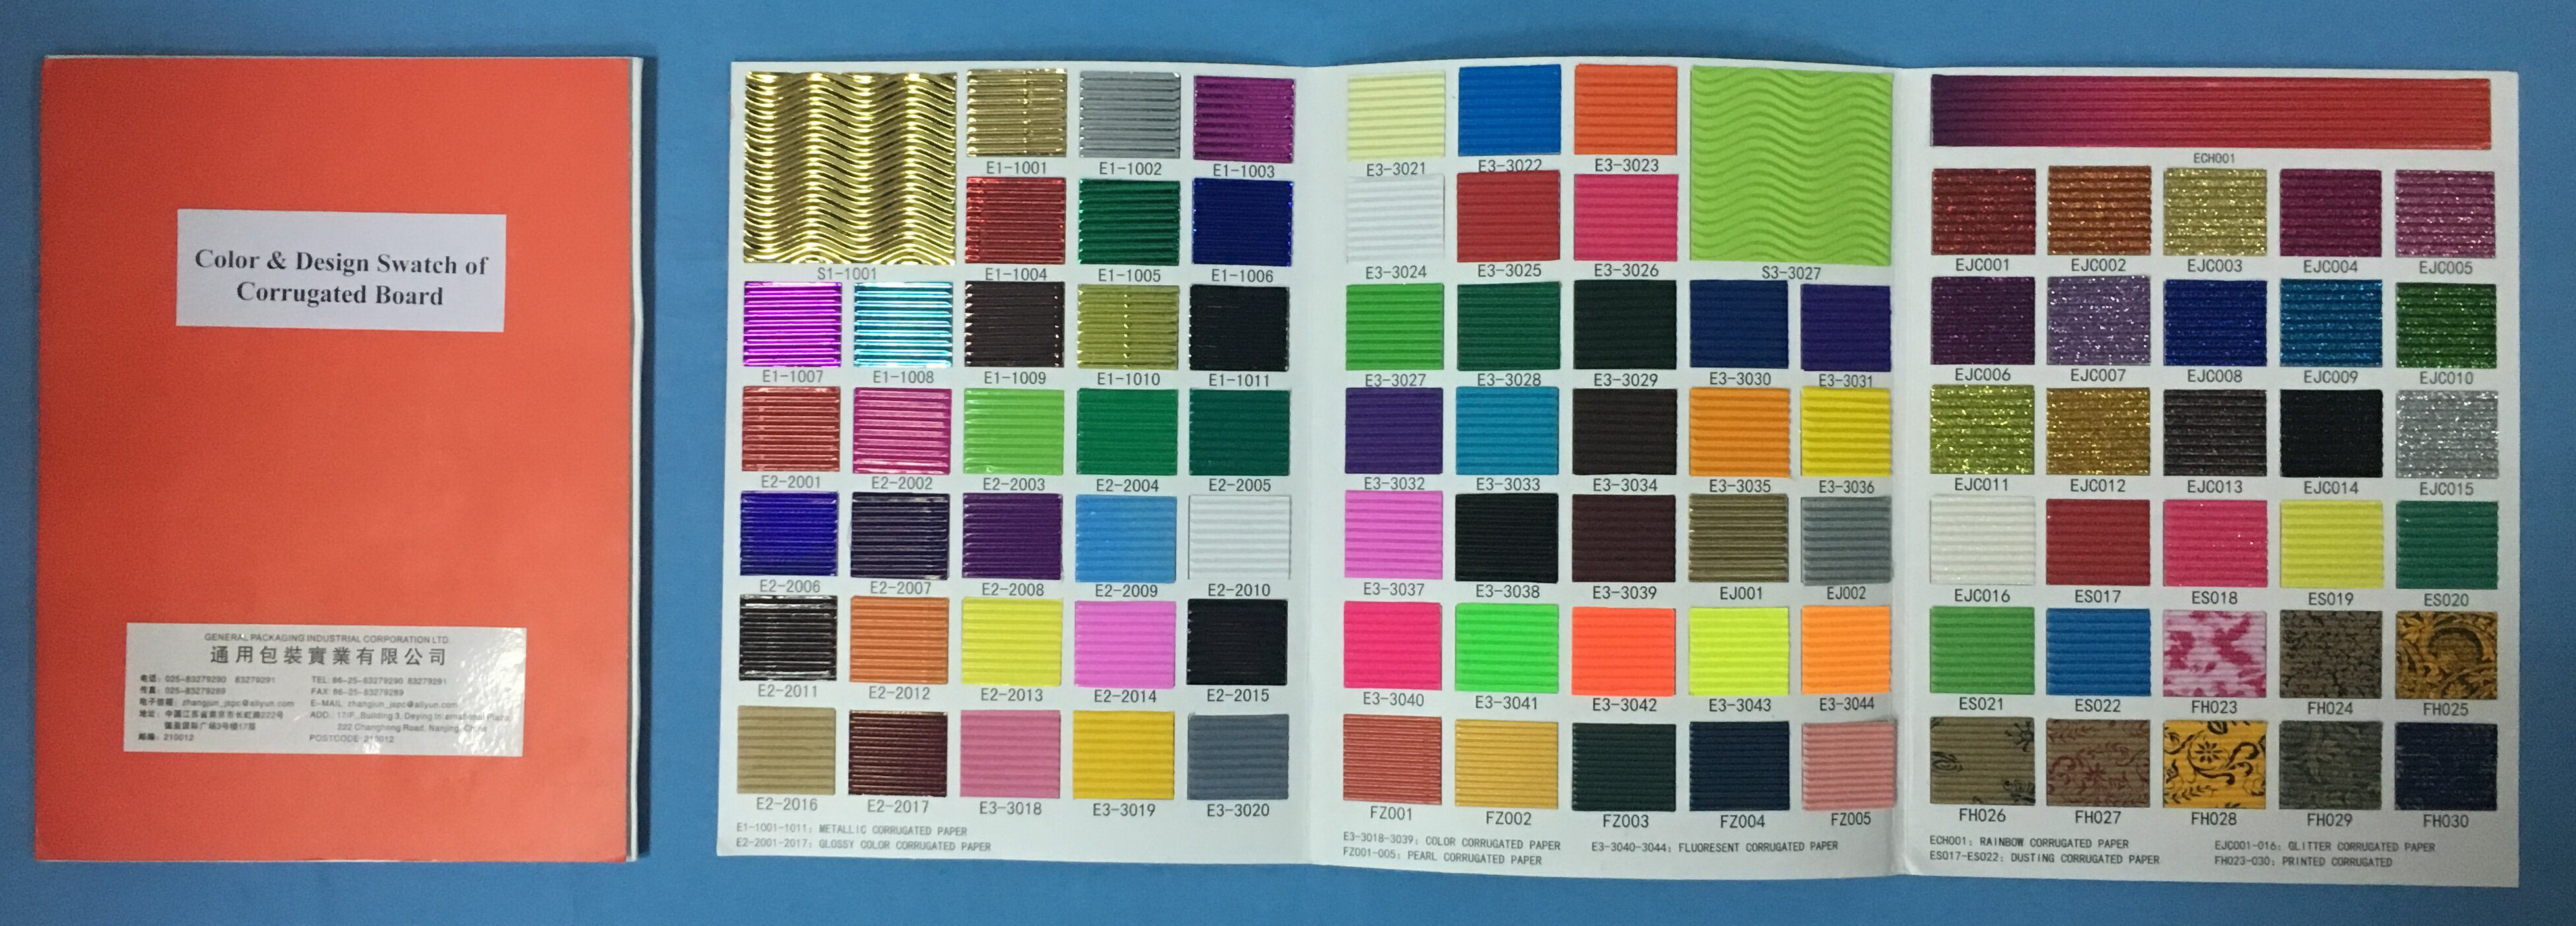 Color Swatch of Corrugated Board